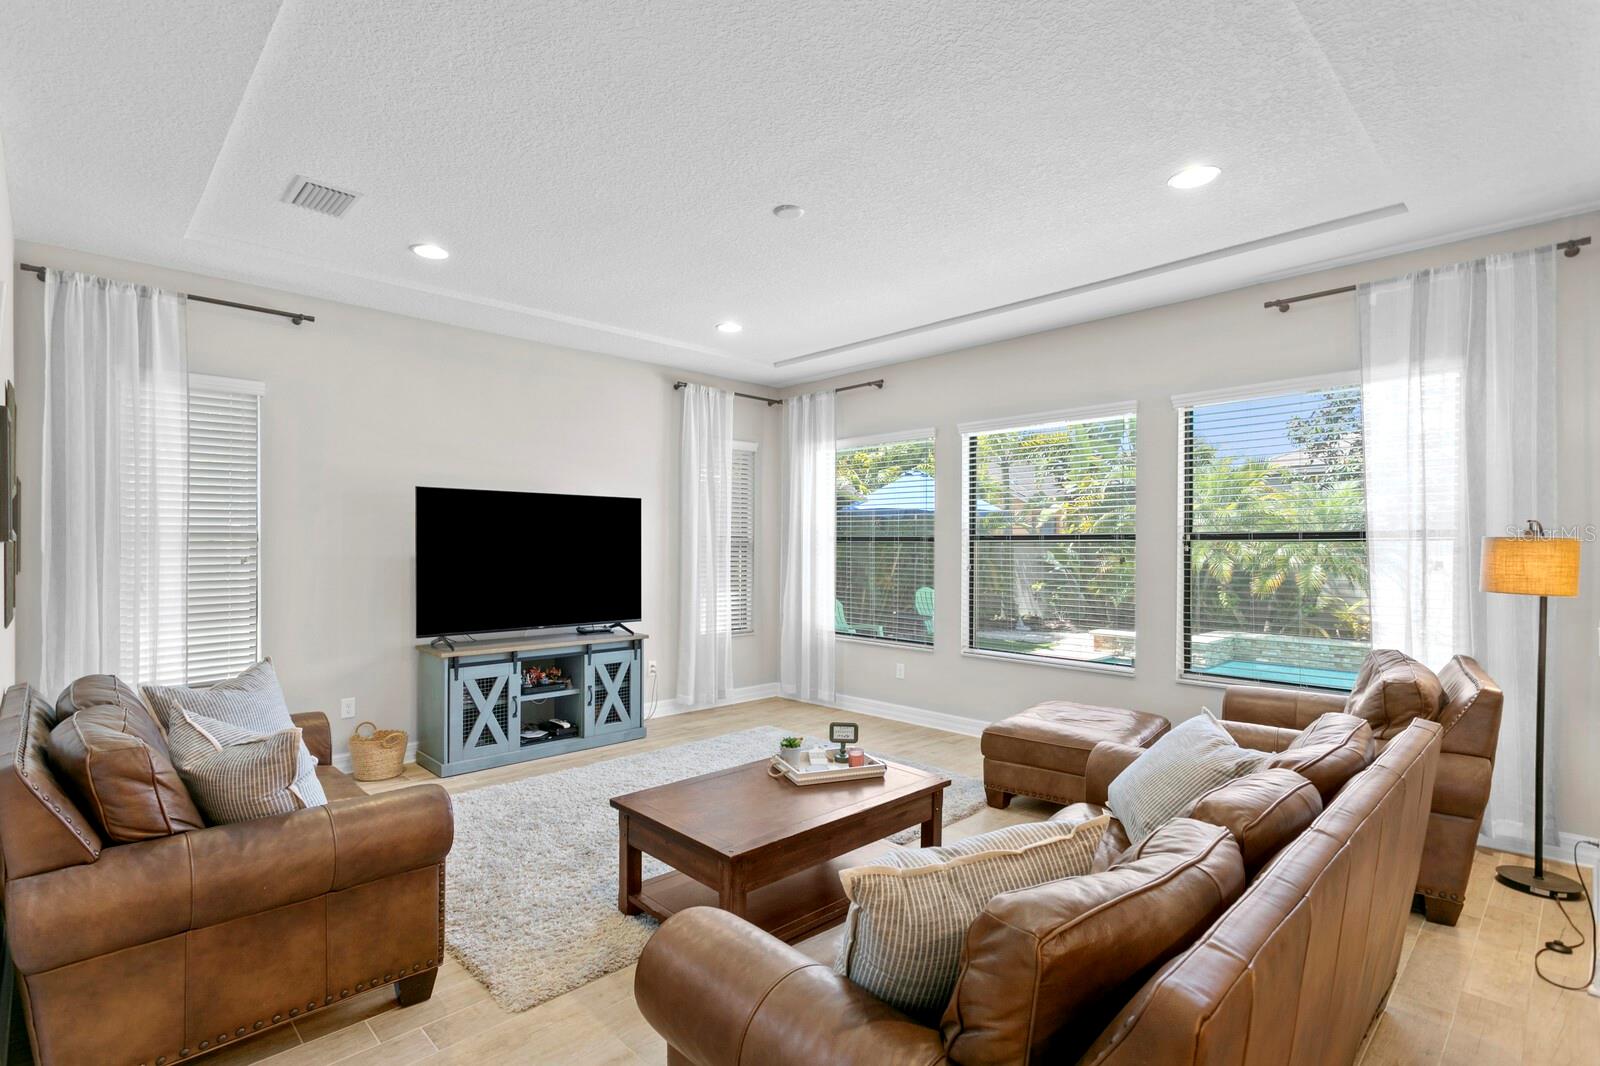 The living room has full outdoor views with lush mature landscaping.